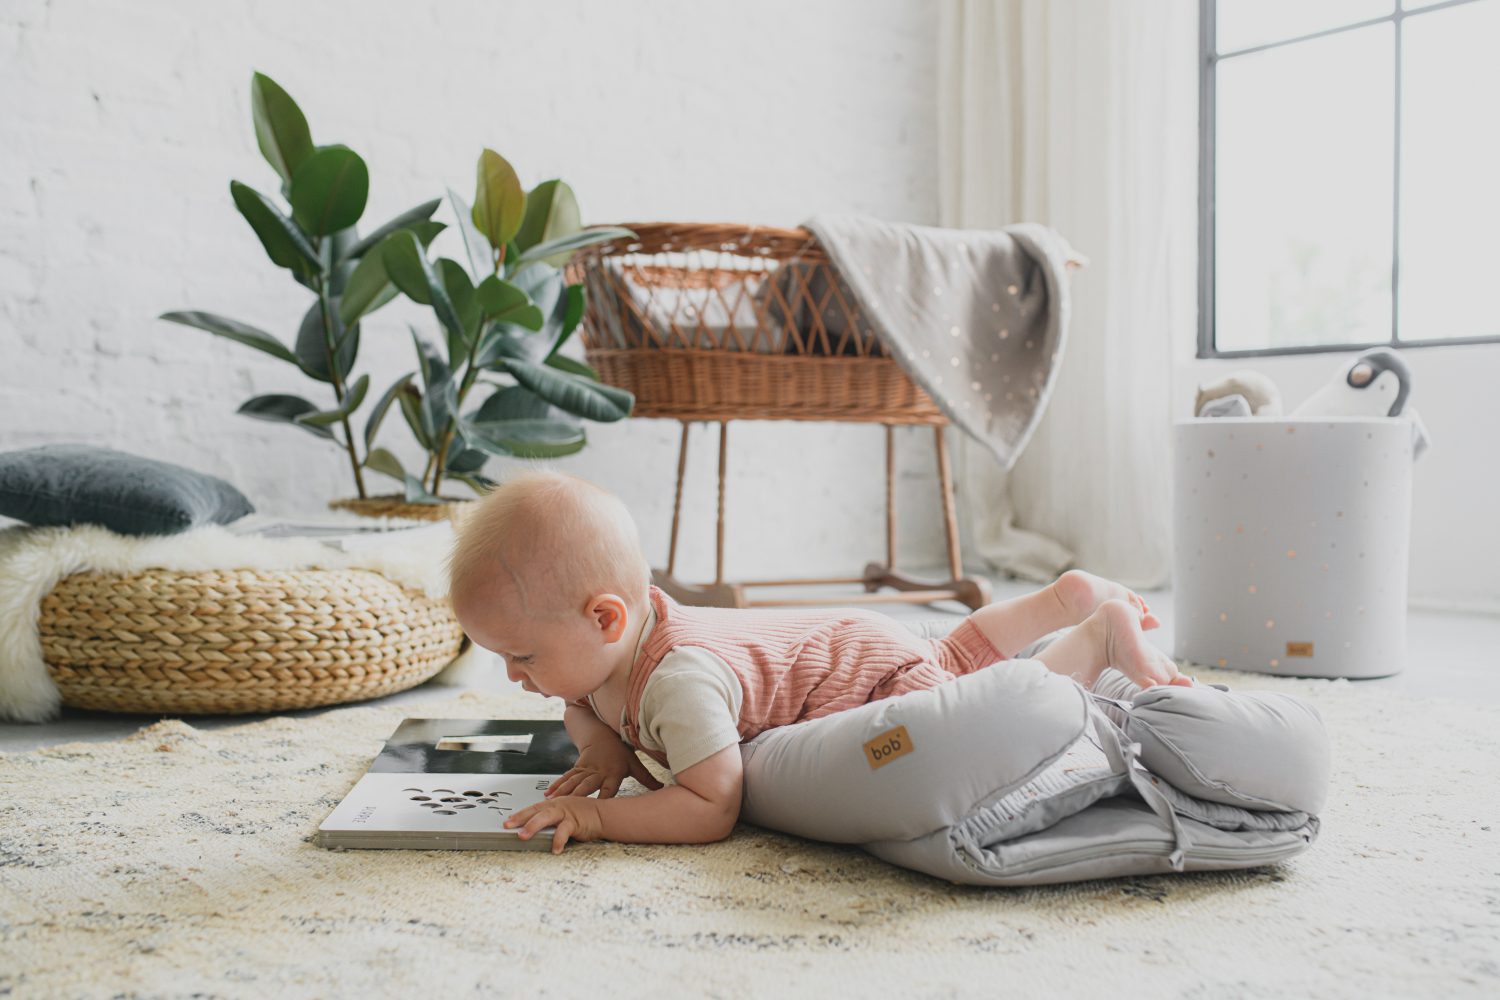 Baby nest - What are its advantages? Why is it so successful?